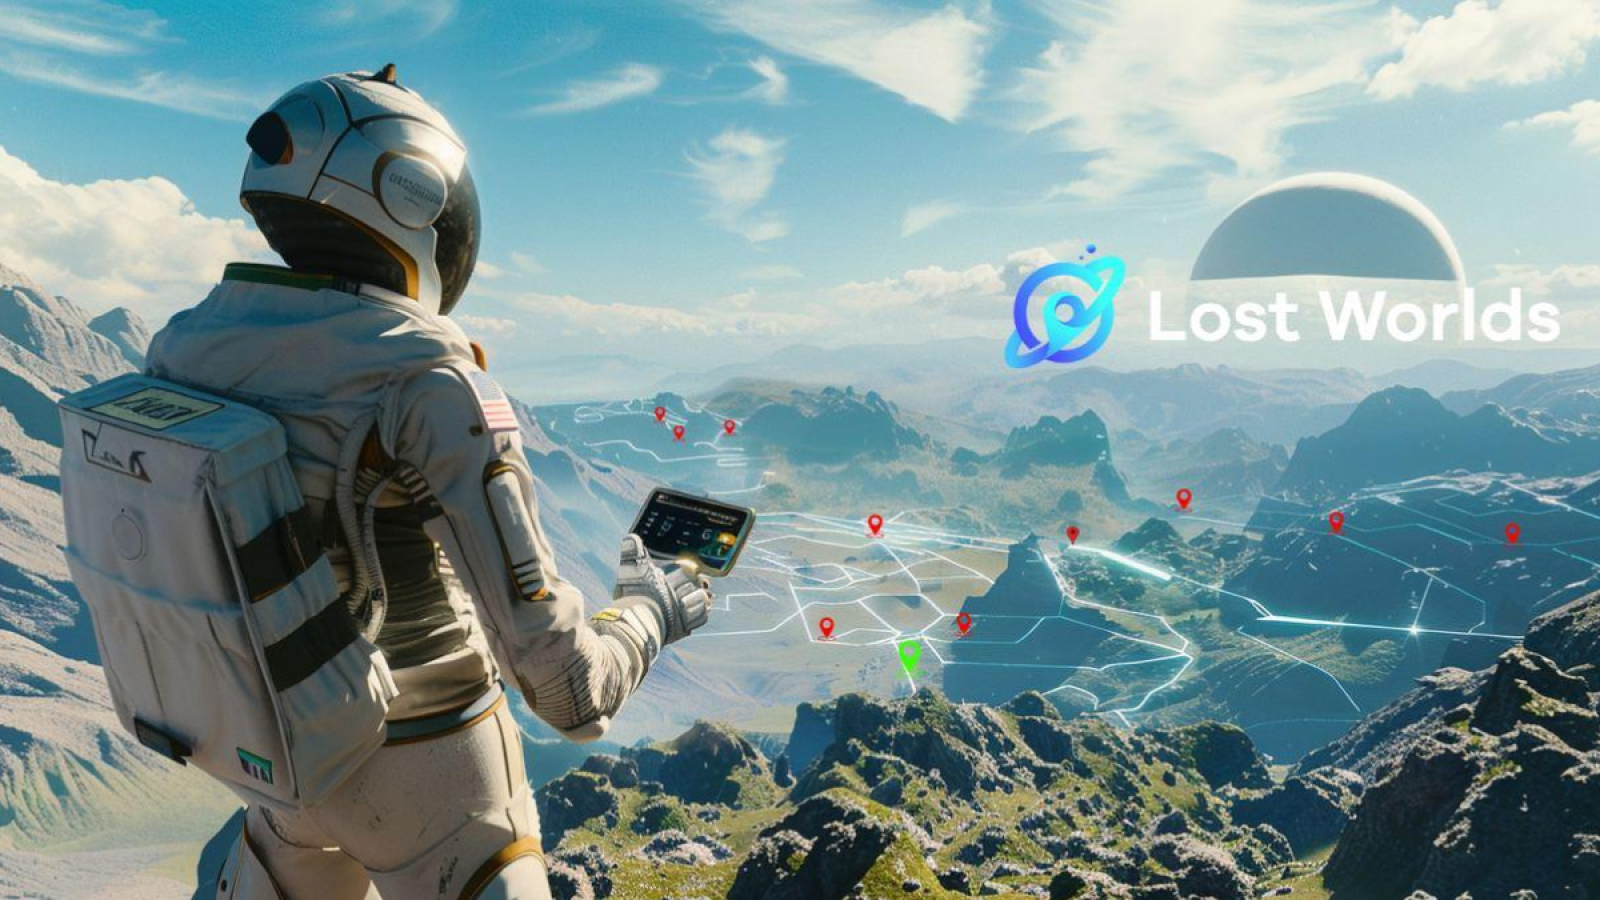 NFT Platform Lost Worlds Launches Creation Portal to Enable Simplified GeoNFT Minting